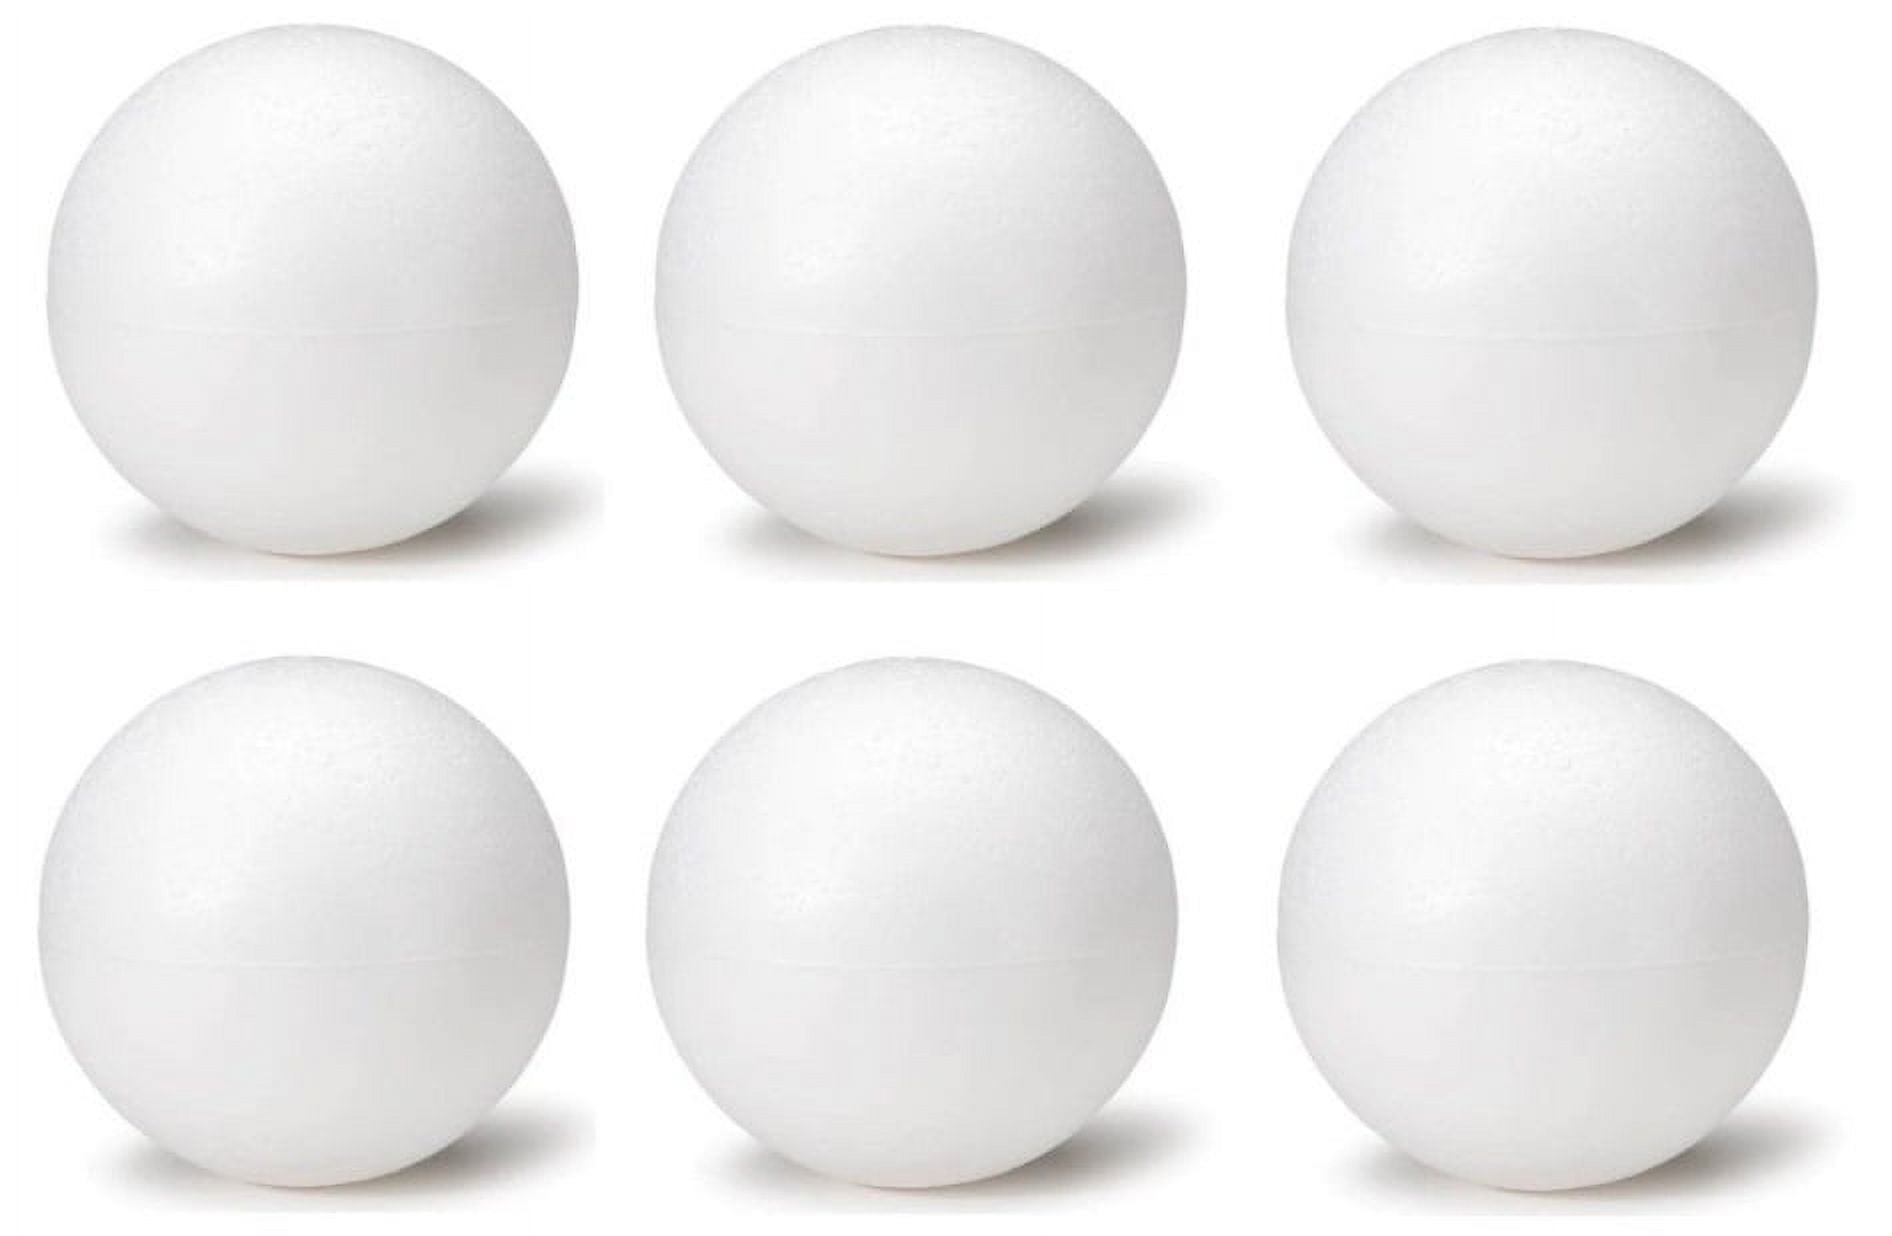 8 Inch Foam Ball Polystyrene Balls for Art & Crafts Projects 